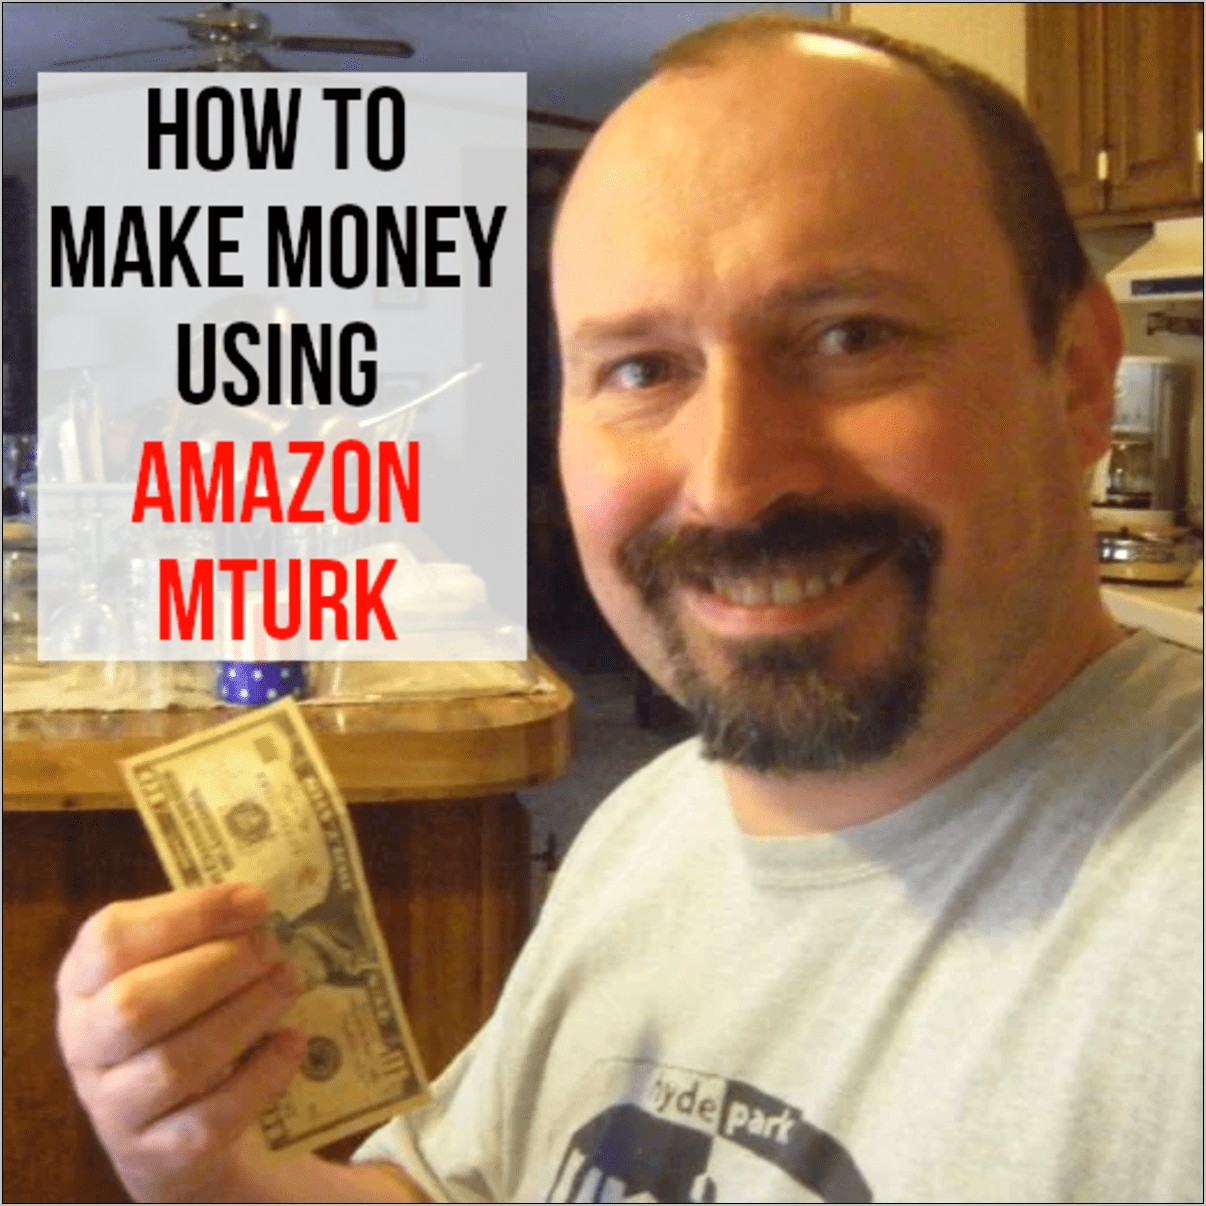 Can You Put Amazon Mturk On Your Resume